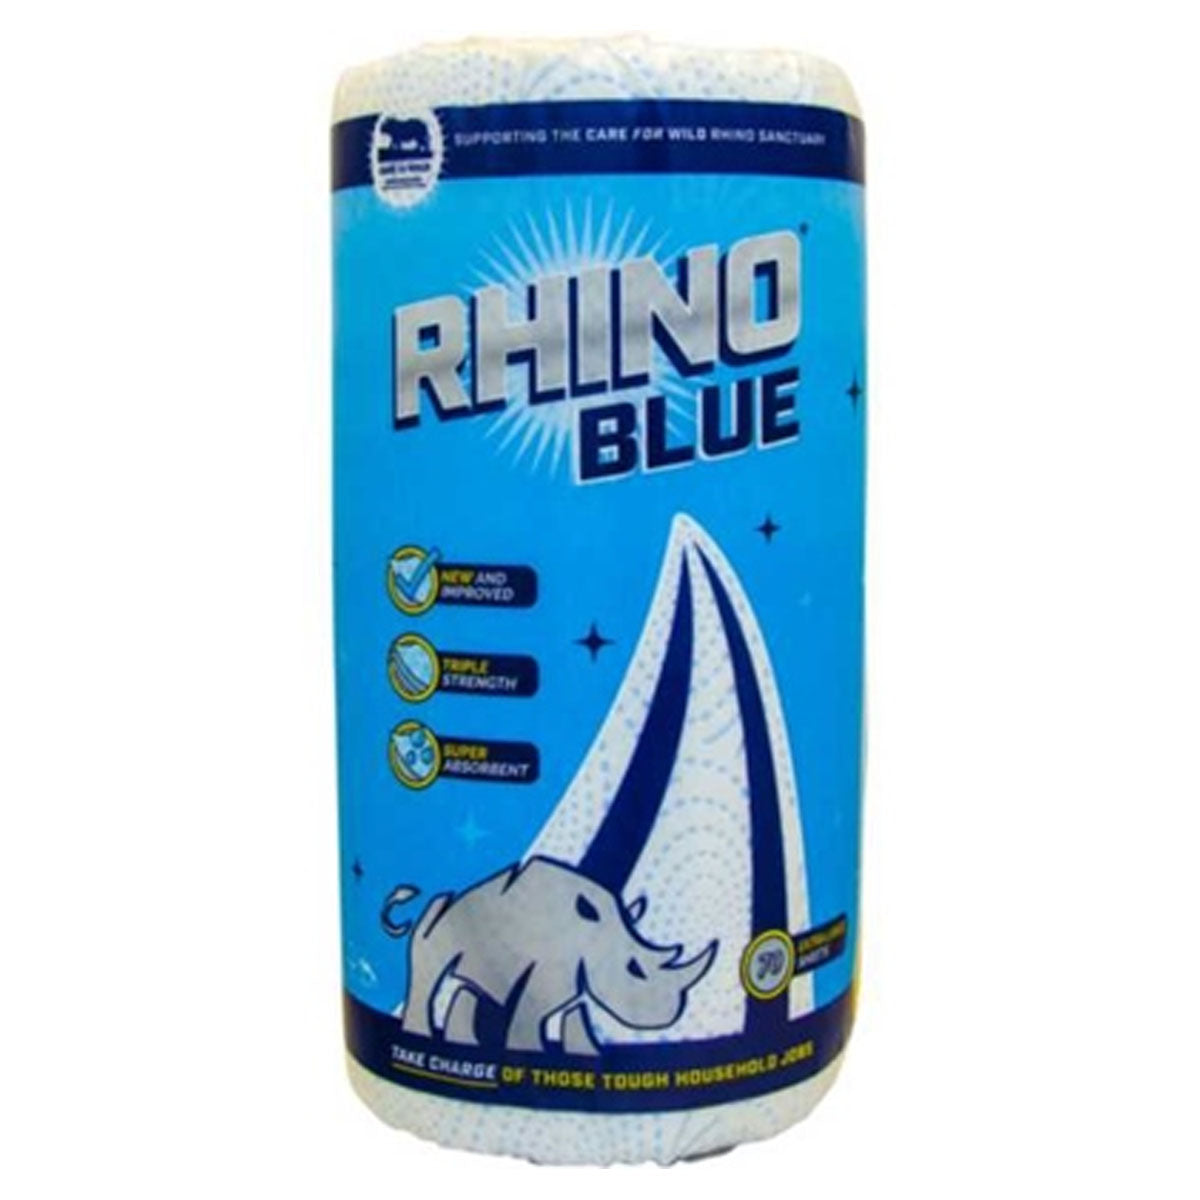 A roll of Rhino Blue - 3ply Kitchen Towel - 1 pcs toilet paper.